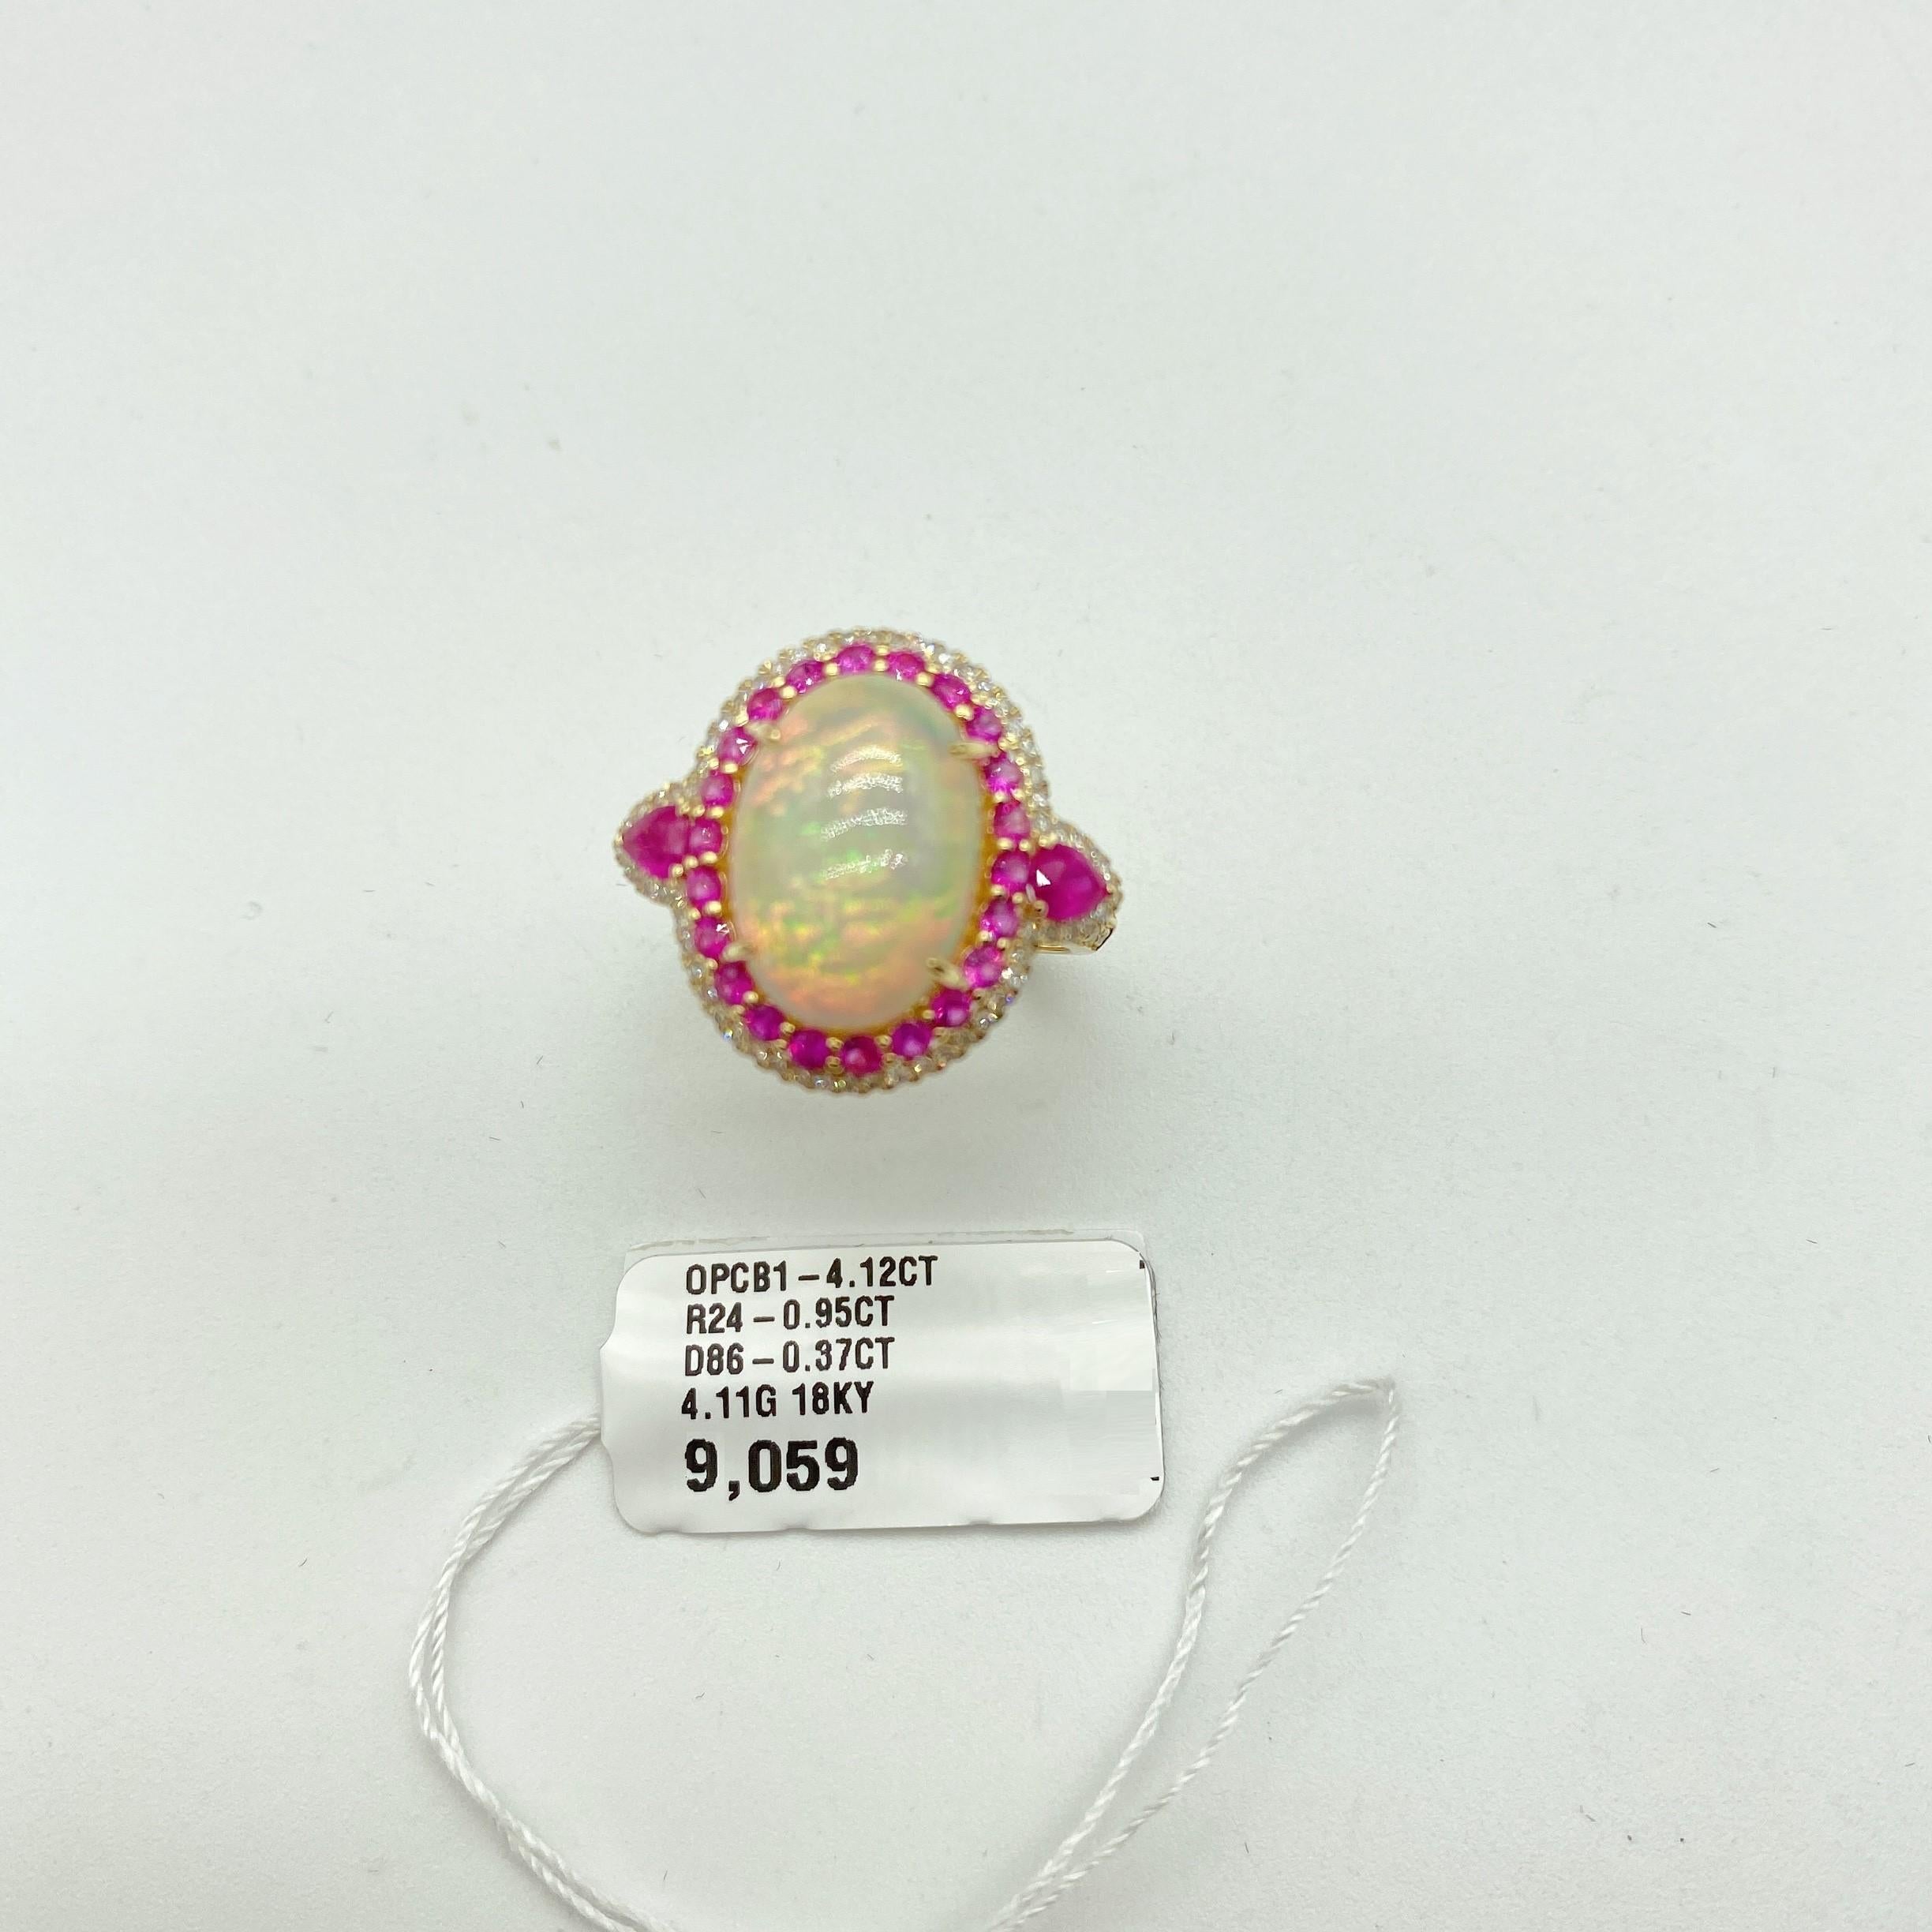 Nwt 9, 059 Rare 18KT Fancy Large Gorgeous Glittering 6CT Opal Ruby Diamond Ring In New Condition For Sale In New York, NY